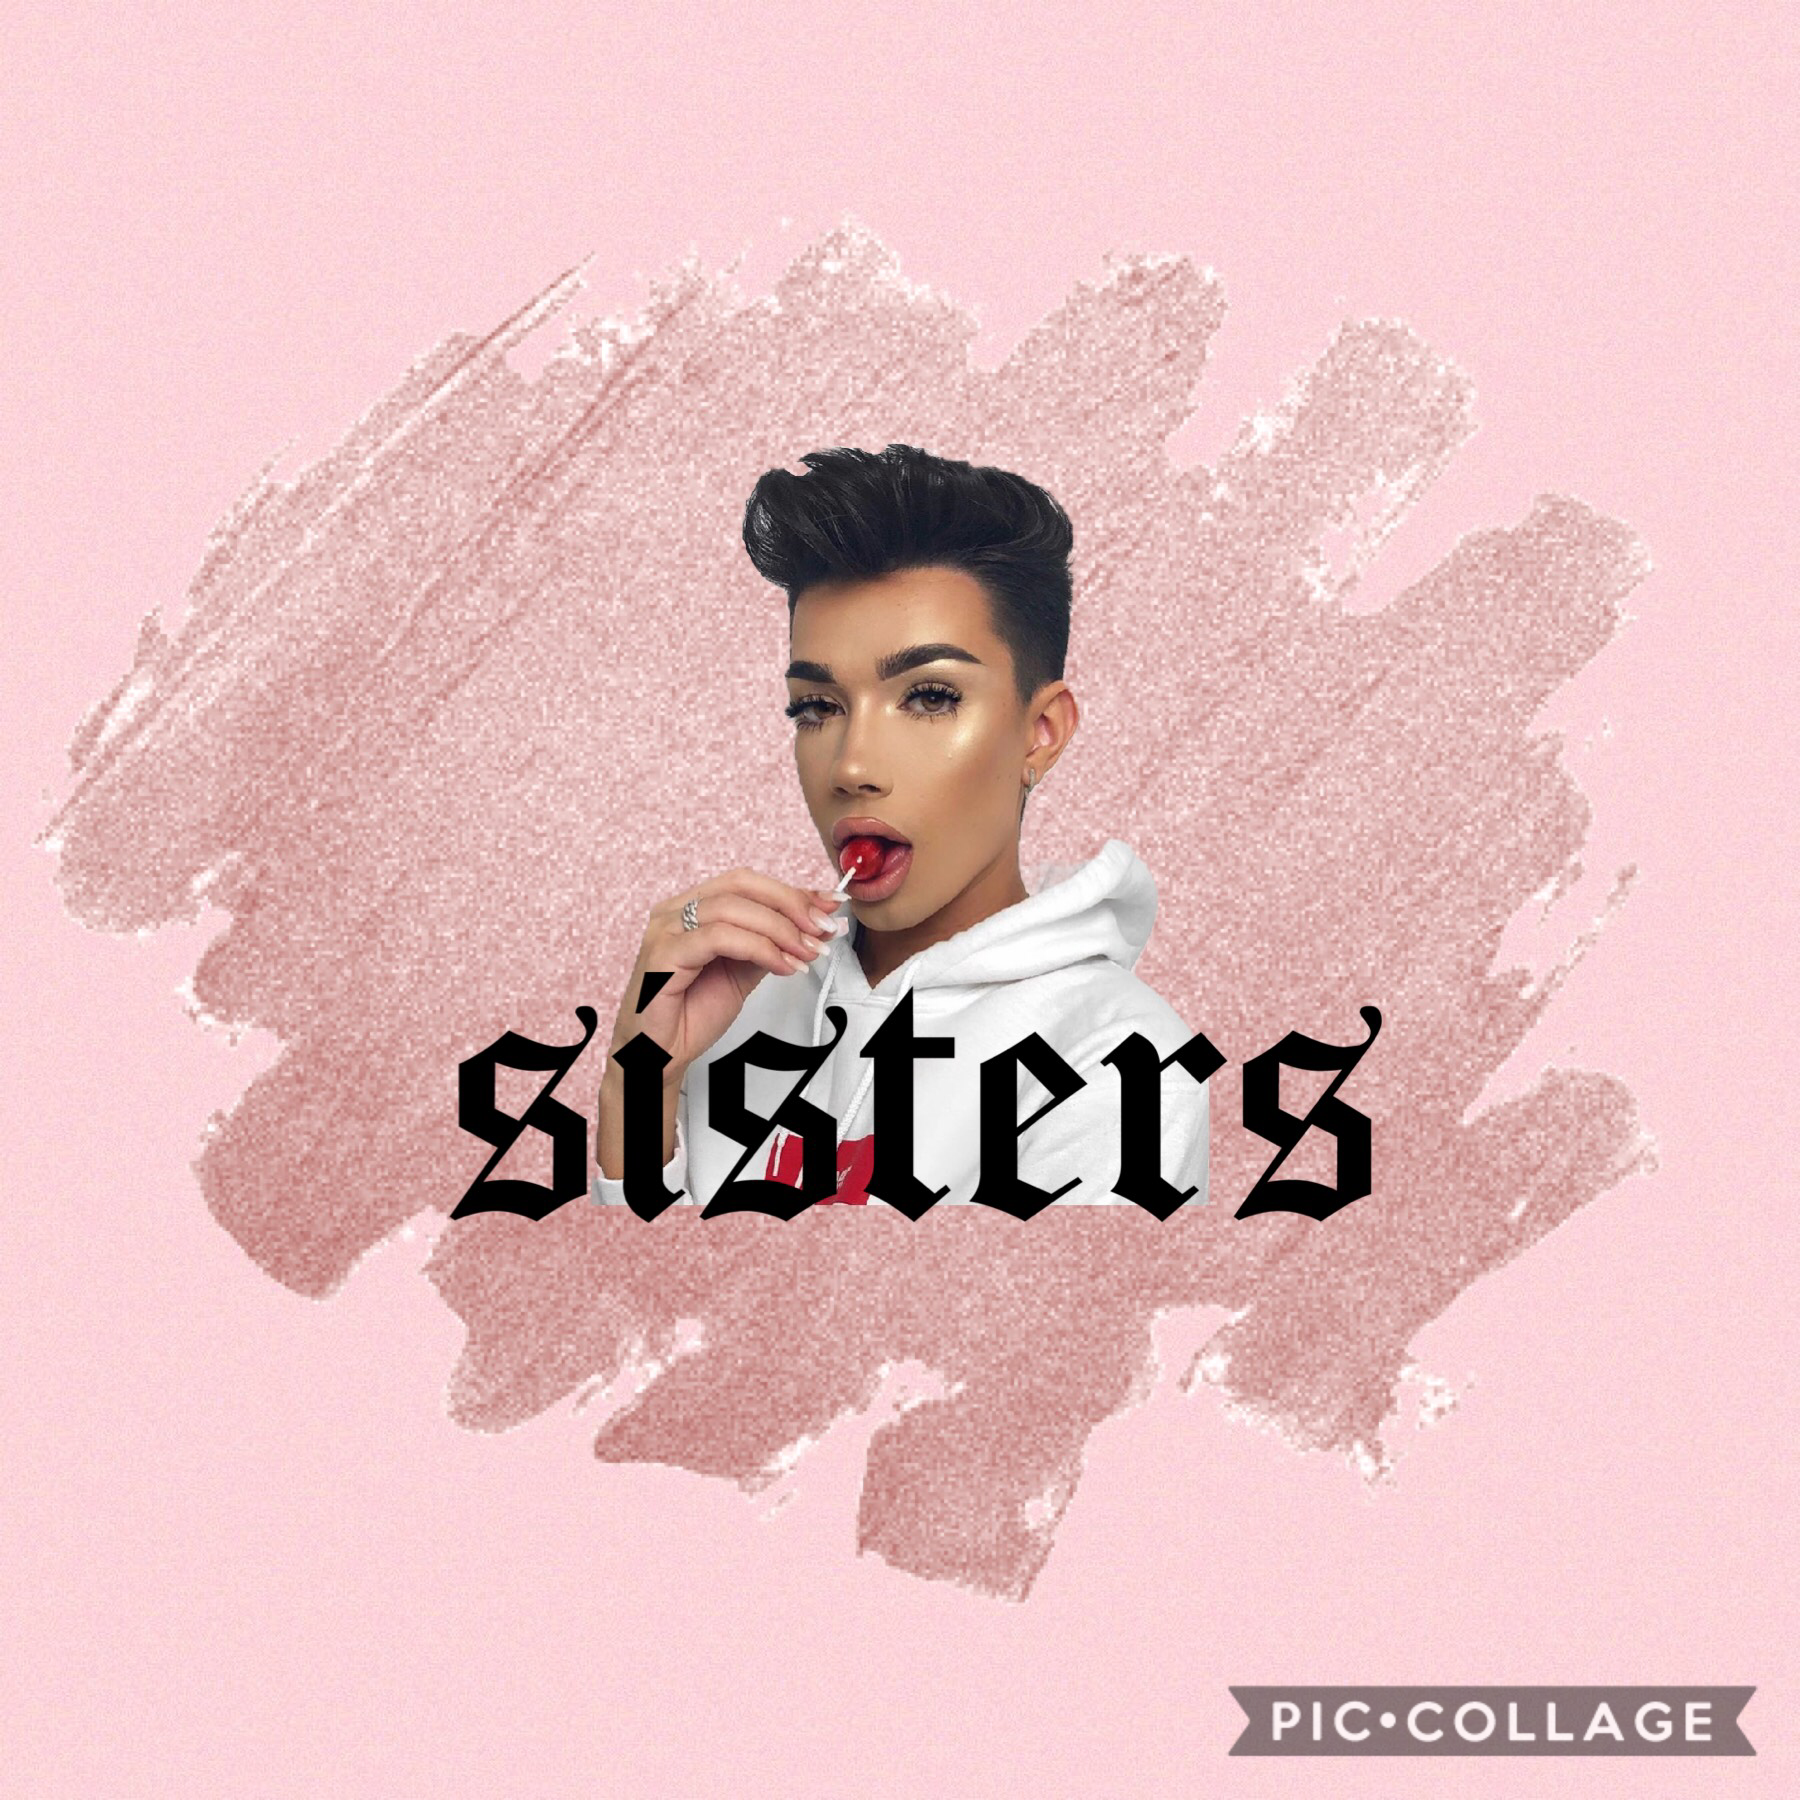 Not Cash, but love this sister snatched edit!